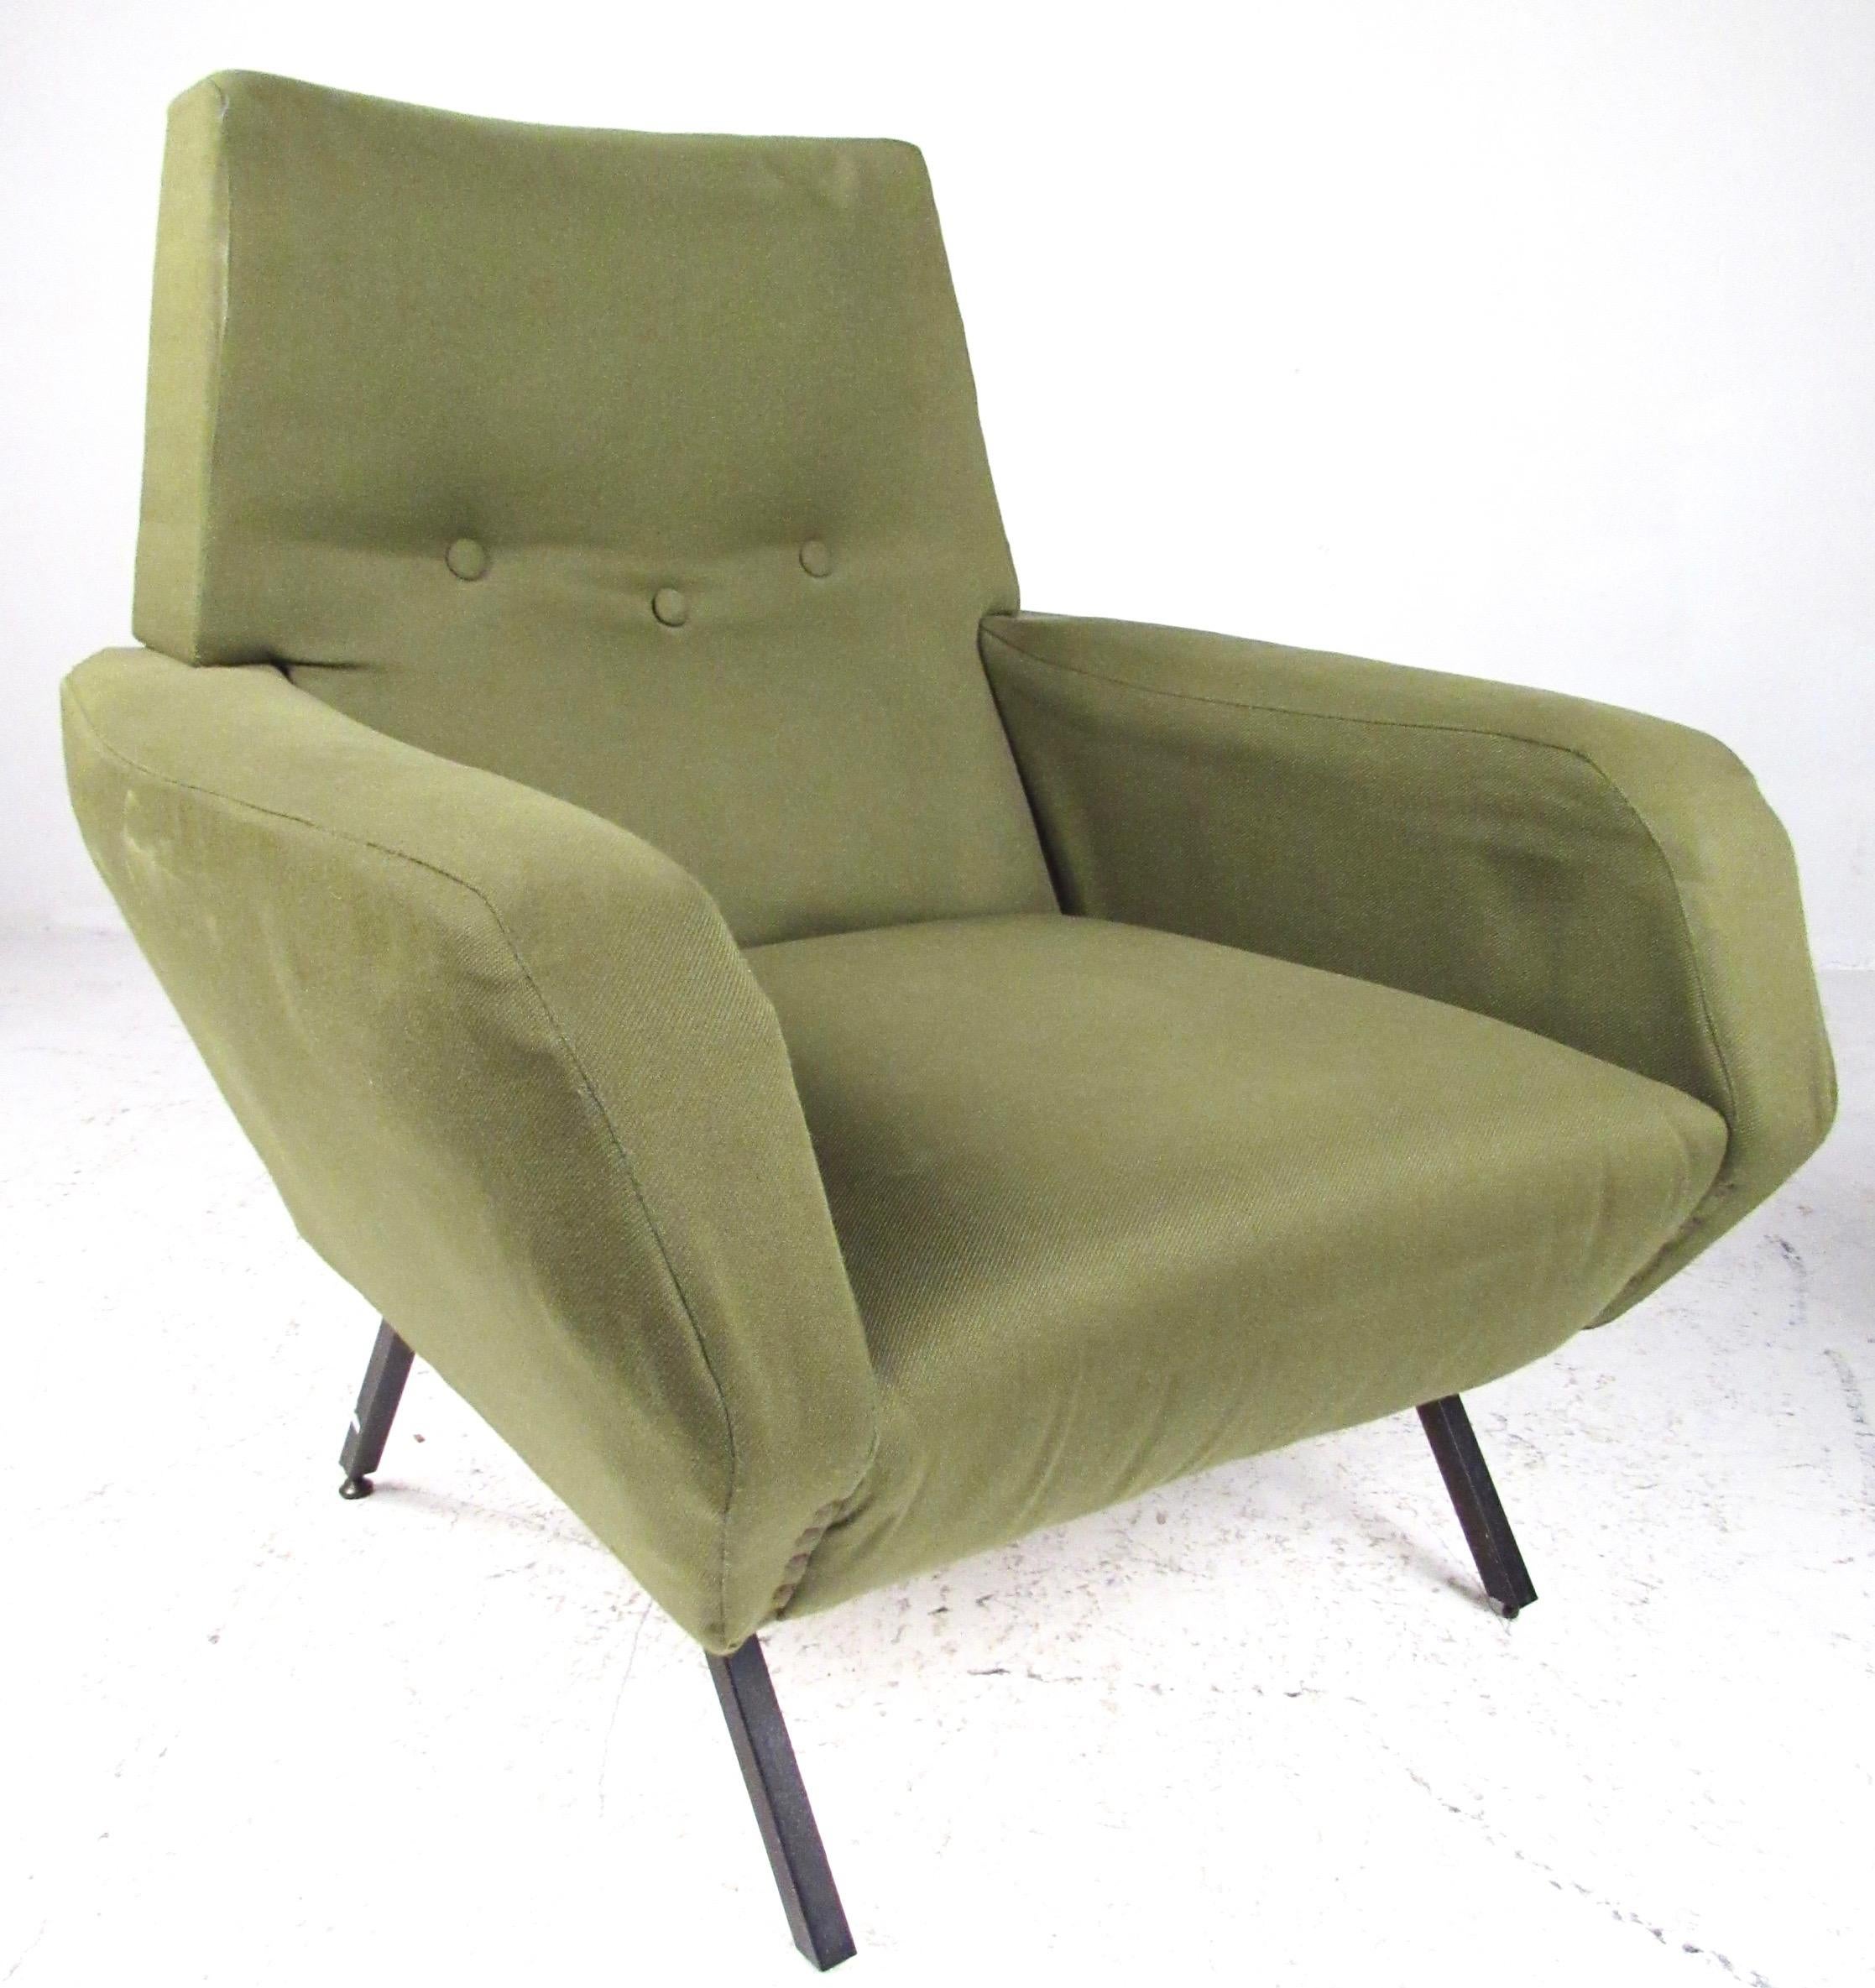 Pair of Italian Modern Armchairs after Osvaldo Borsani In Good Condition For Sale In Brooklyn, NY